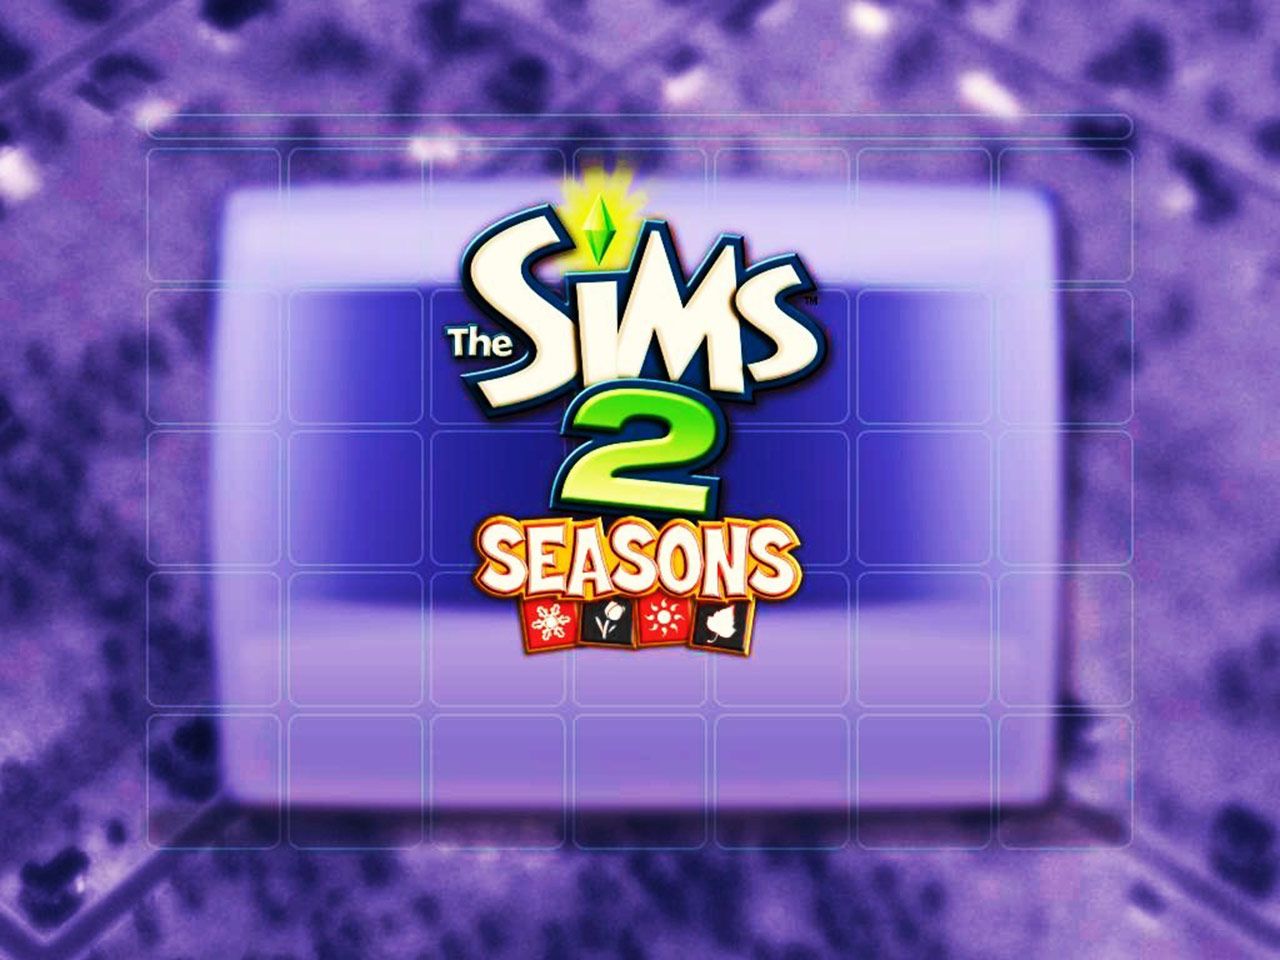 Free download Games Wallpaper The Sims 2 Seasons wallpaper [1280x960] for your Desktop, Mobile & Tablet. Explore Sims 2 Wallpaper. The Sims 4 Wallpaper, The Sims 3 Wallpaper, The Sims 4 CC Wallpaper